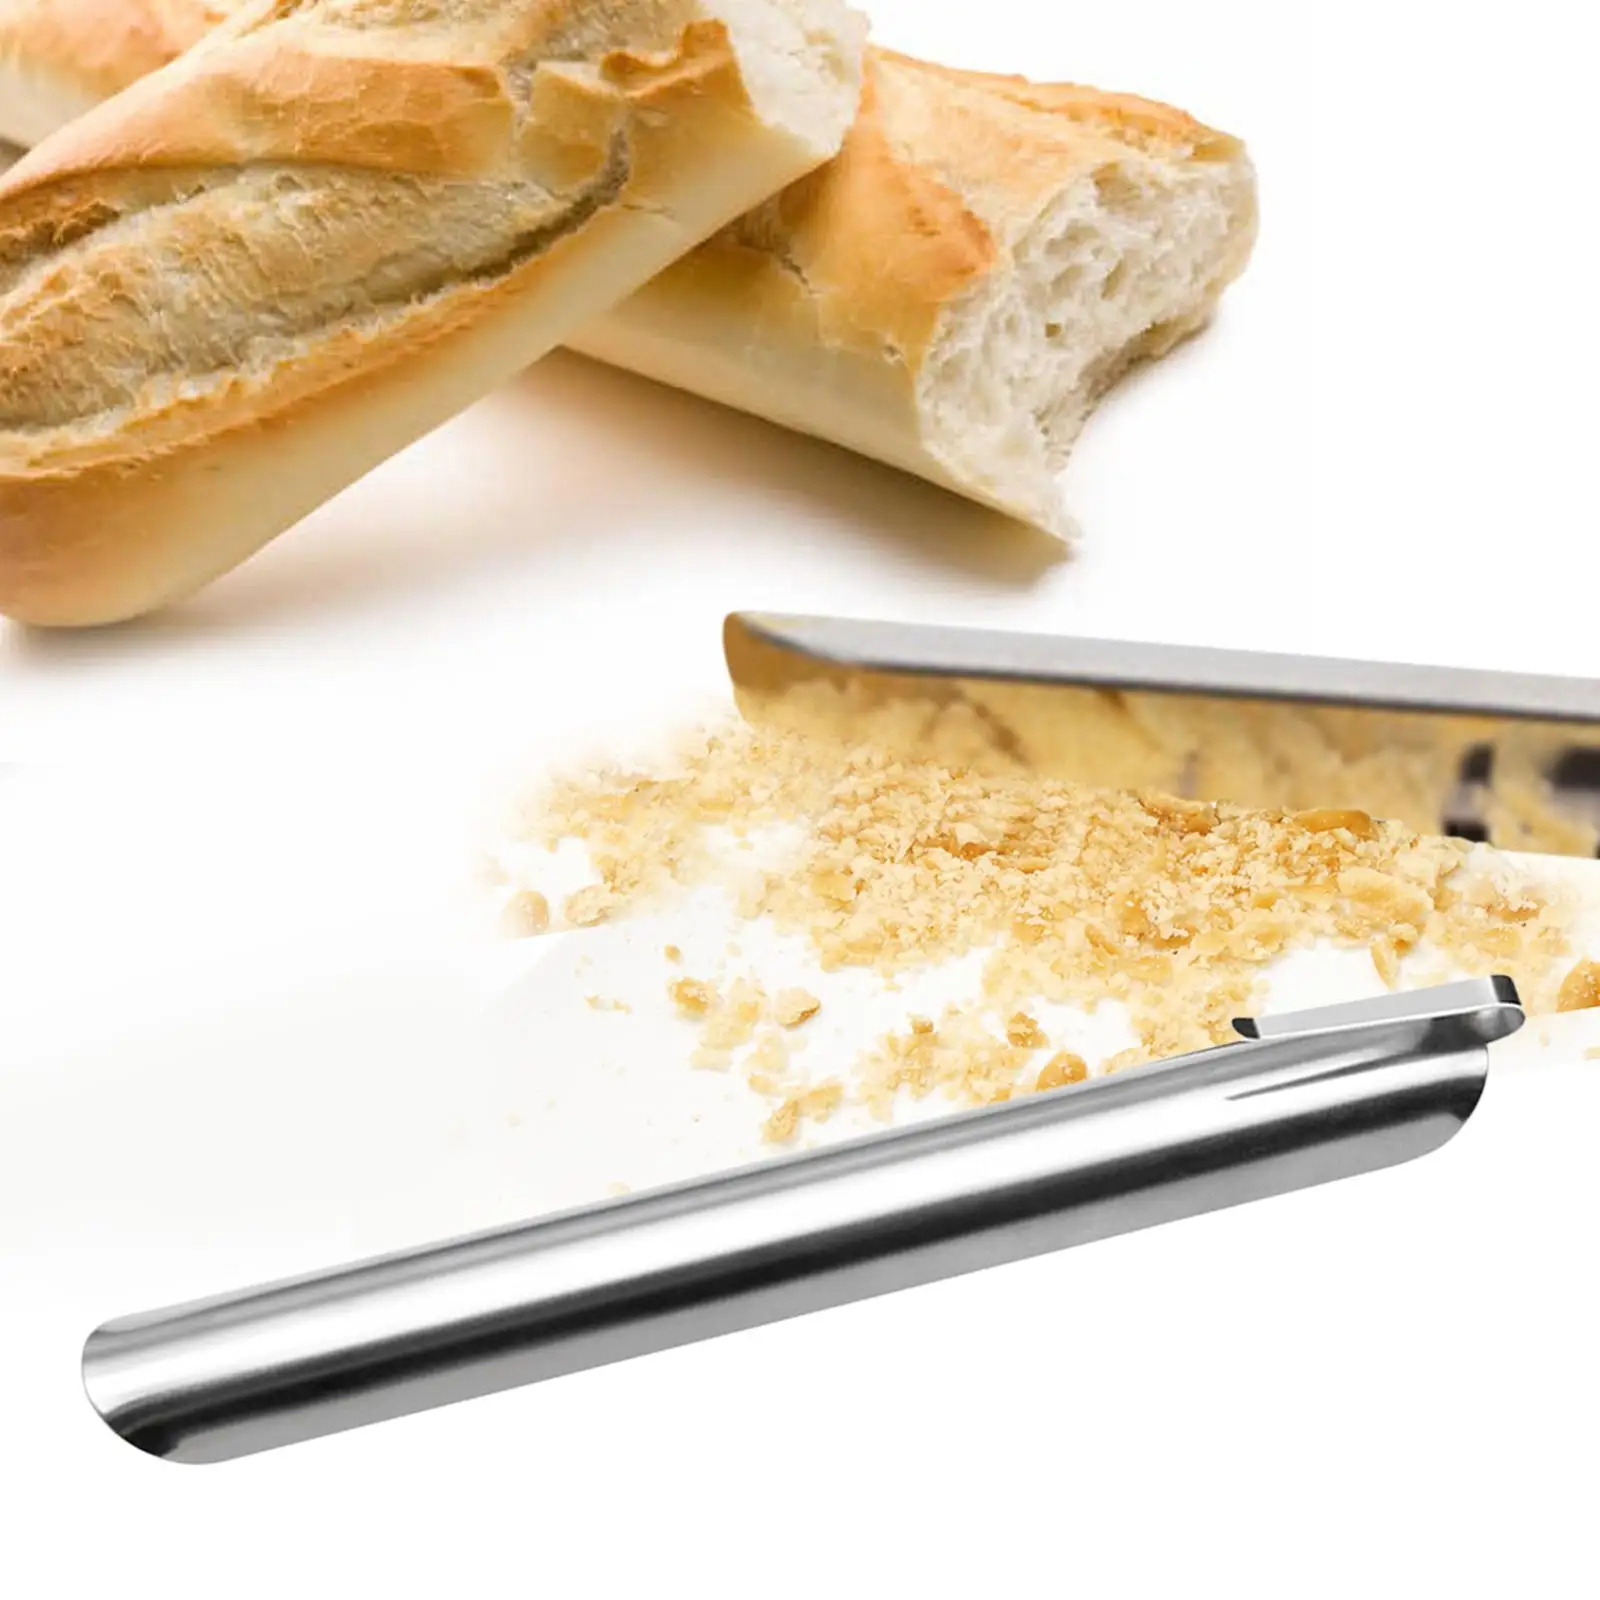 Crumb Sweeper Durable Server Accessories Small Desk Cleaning Tool Stainless Steel Bread Crumber Cleaner for Waitresses Bakery